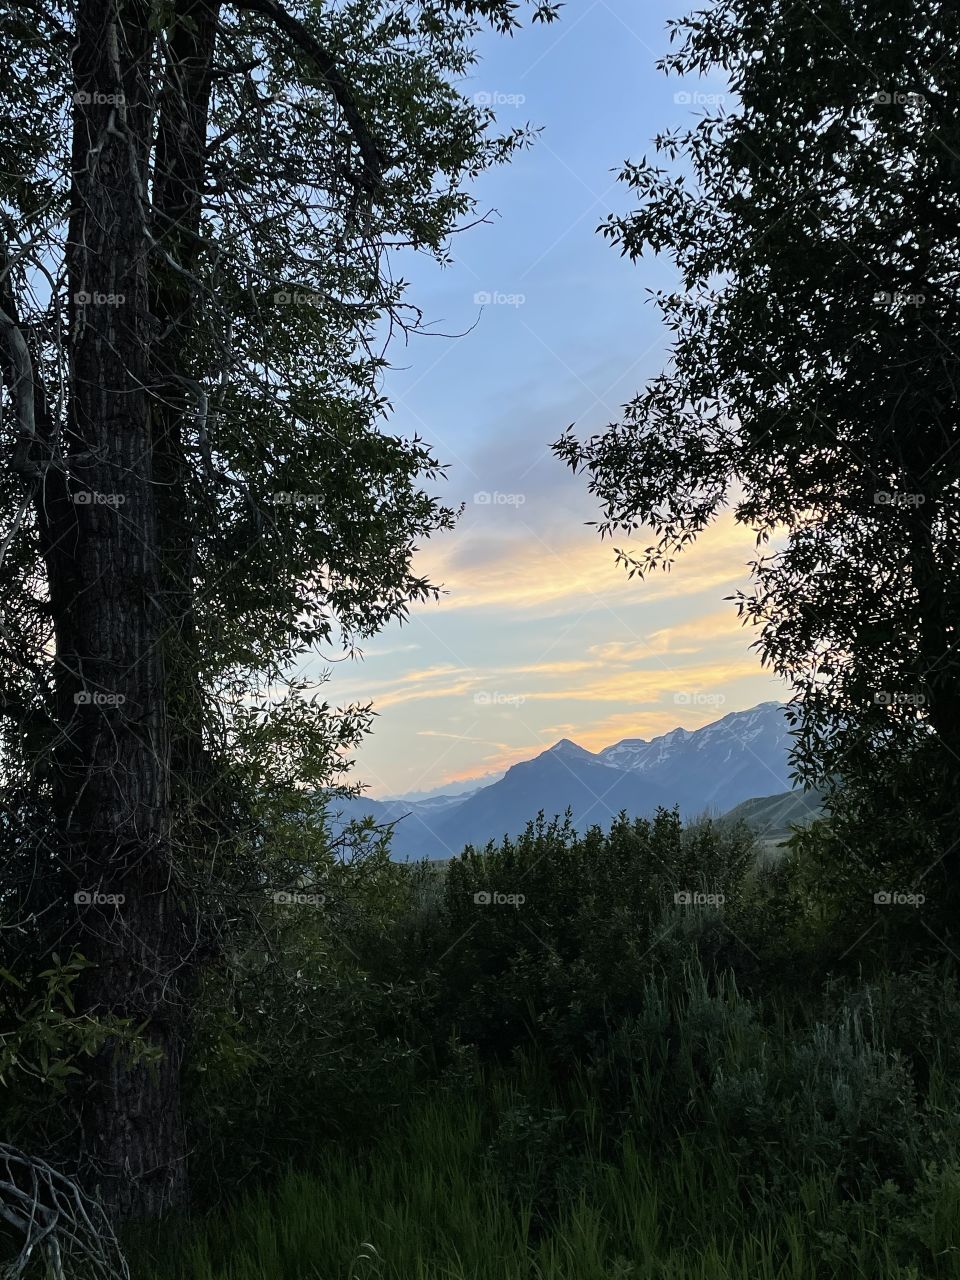 Teton mountains Mountain View scenic landscape trees sunset unedited Beautiful clouds cloudy